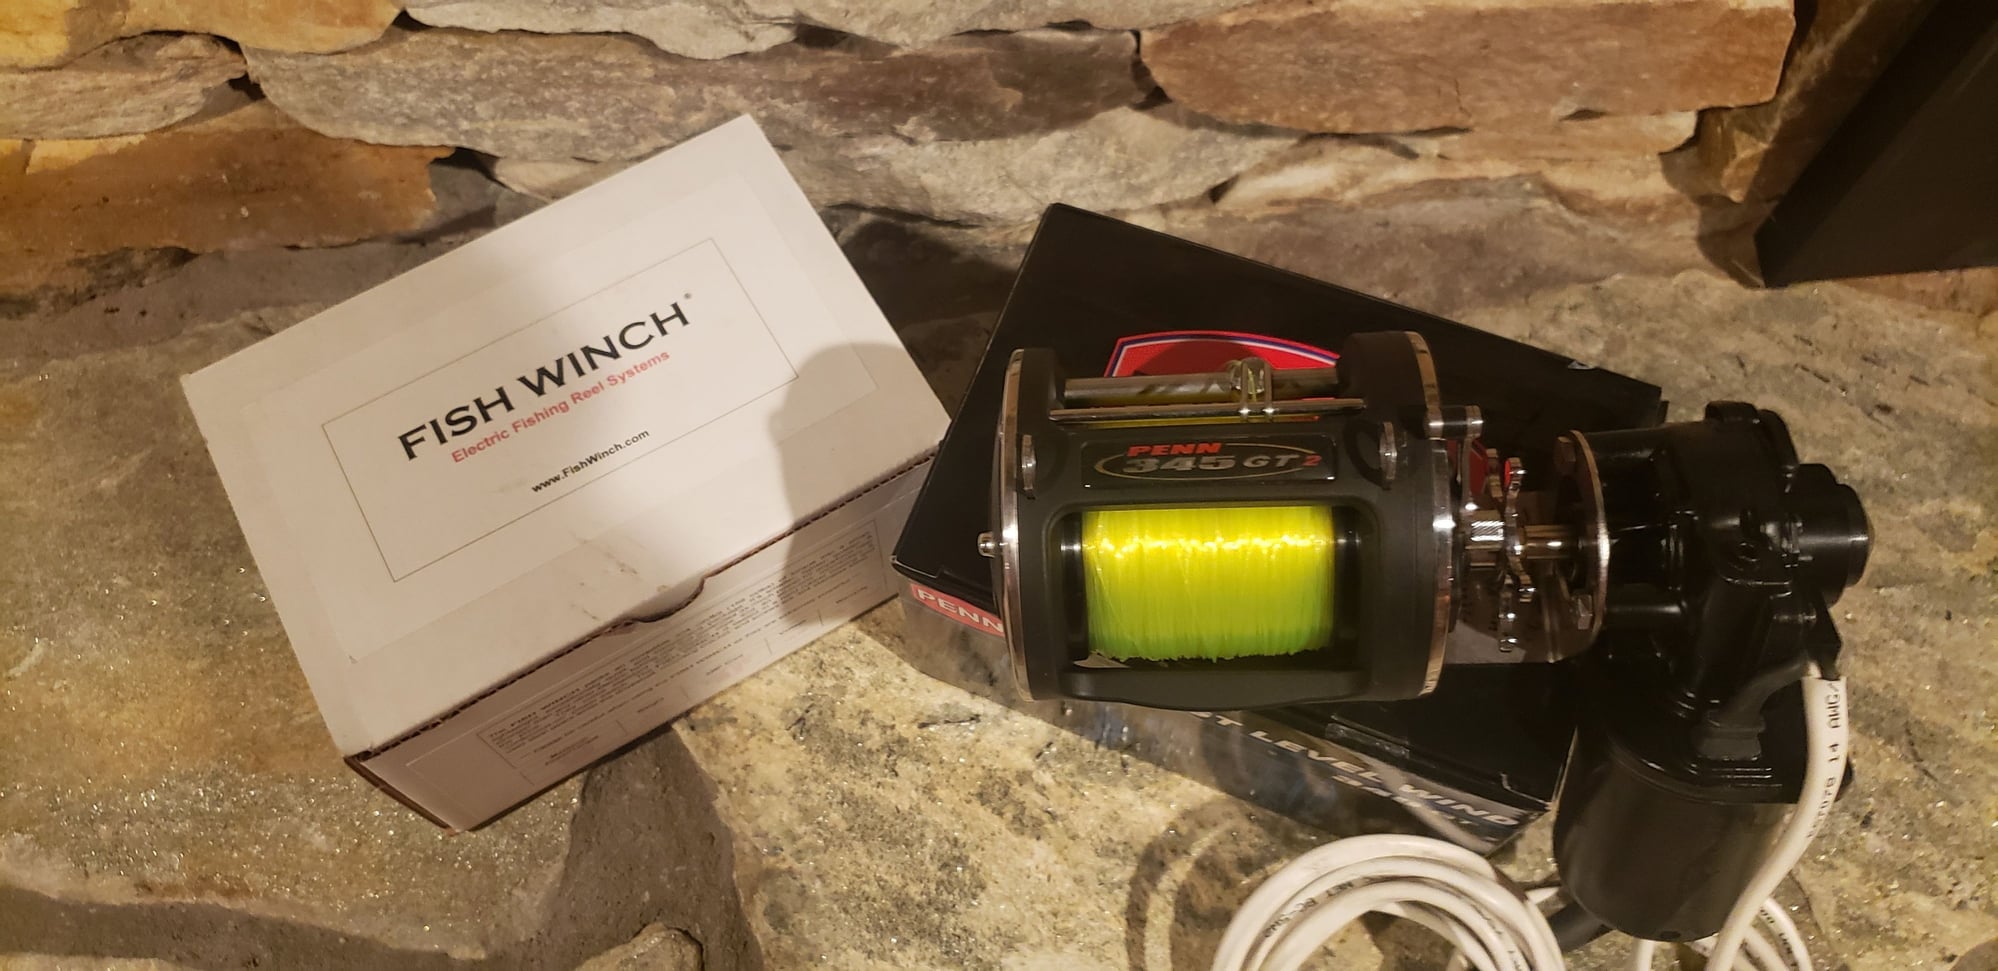 Fish winch with Penn 345GT2 - The Hull Truth - Boating and Fishing Forum